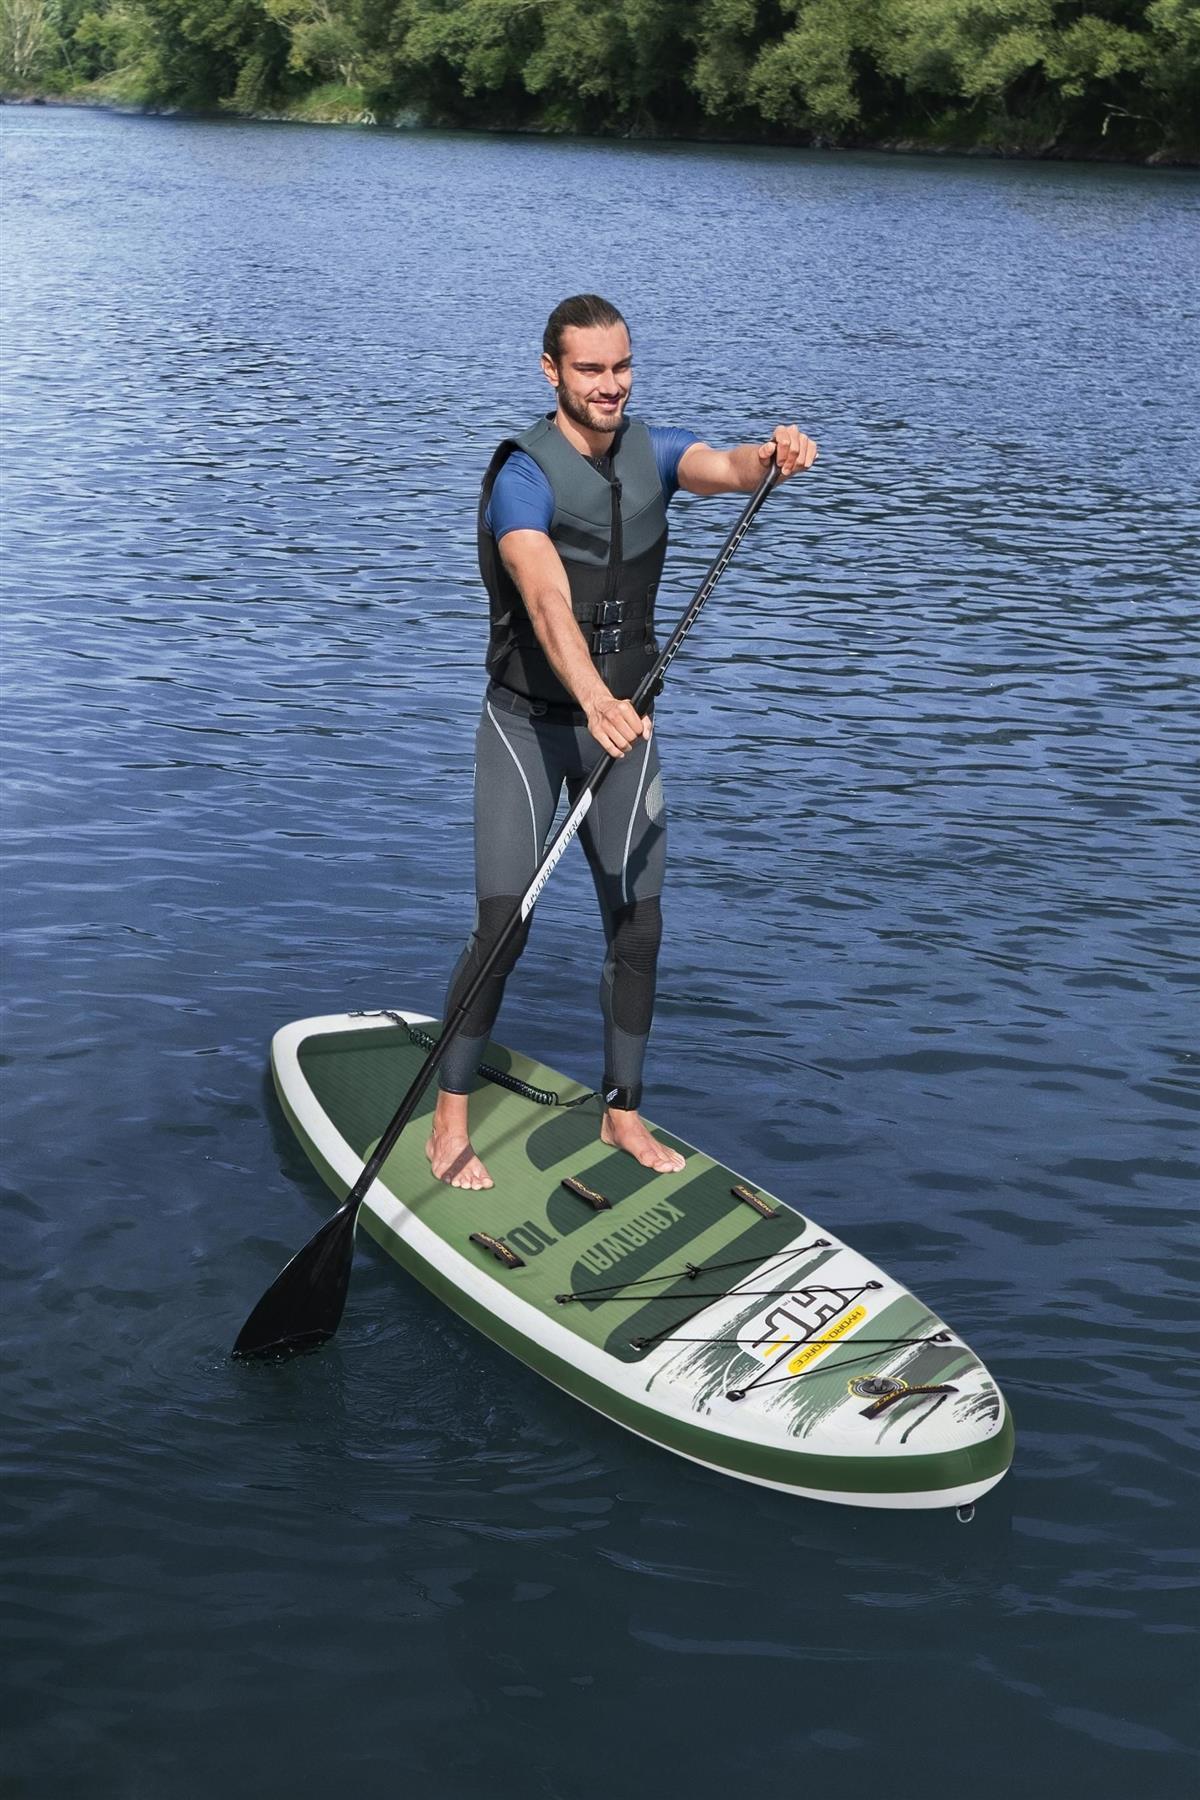 10ft 2" Inflatable Stand Up Paddle Board 6" Hydro Force Kahawai SUP Set Pump